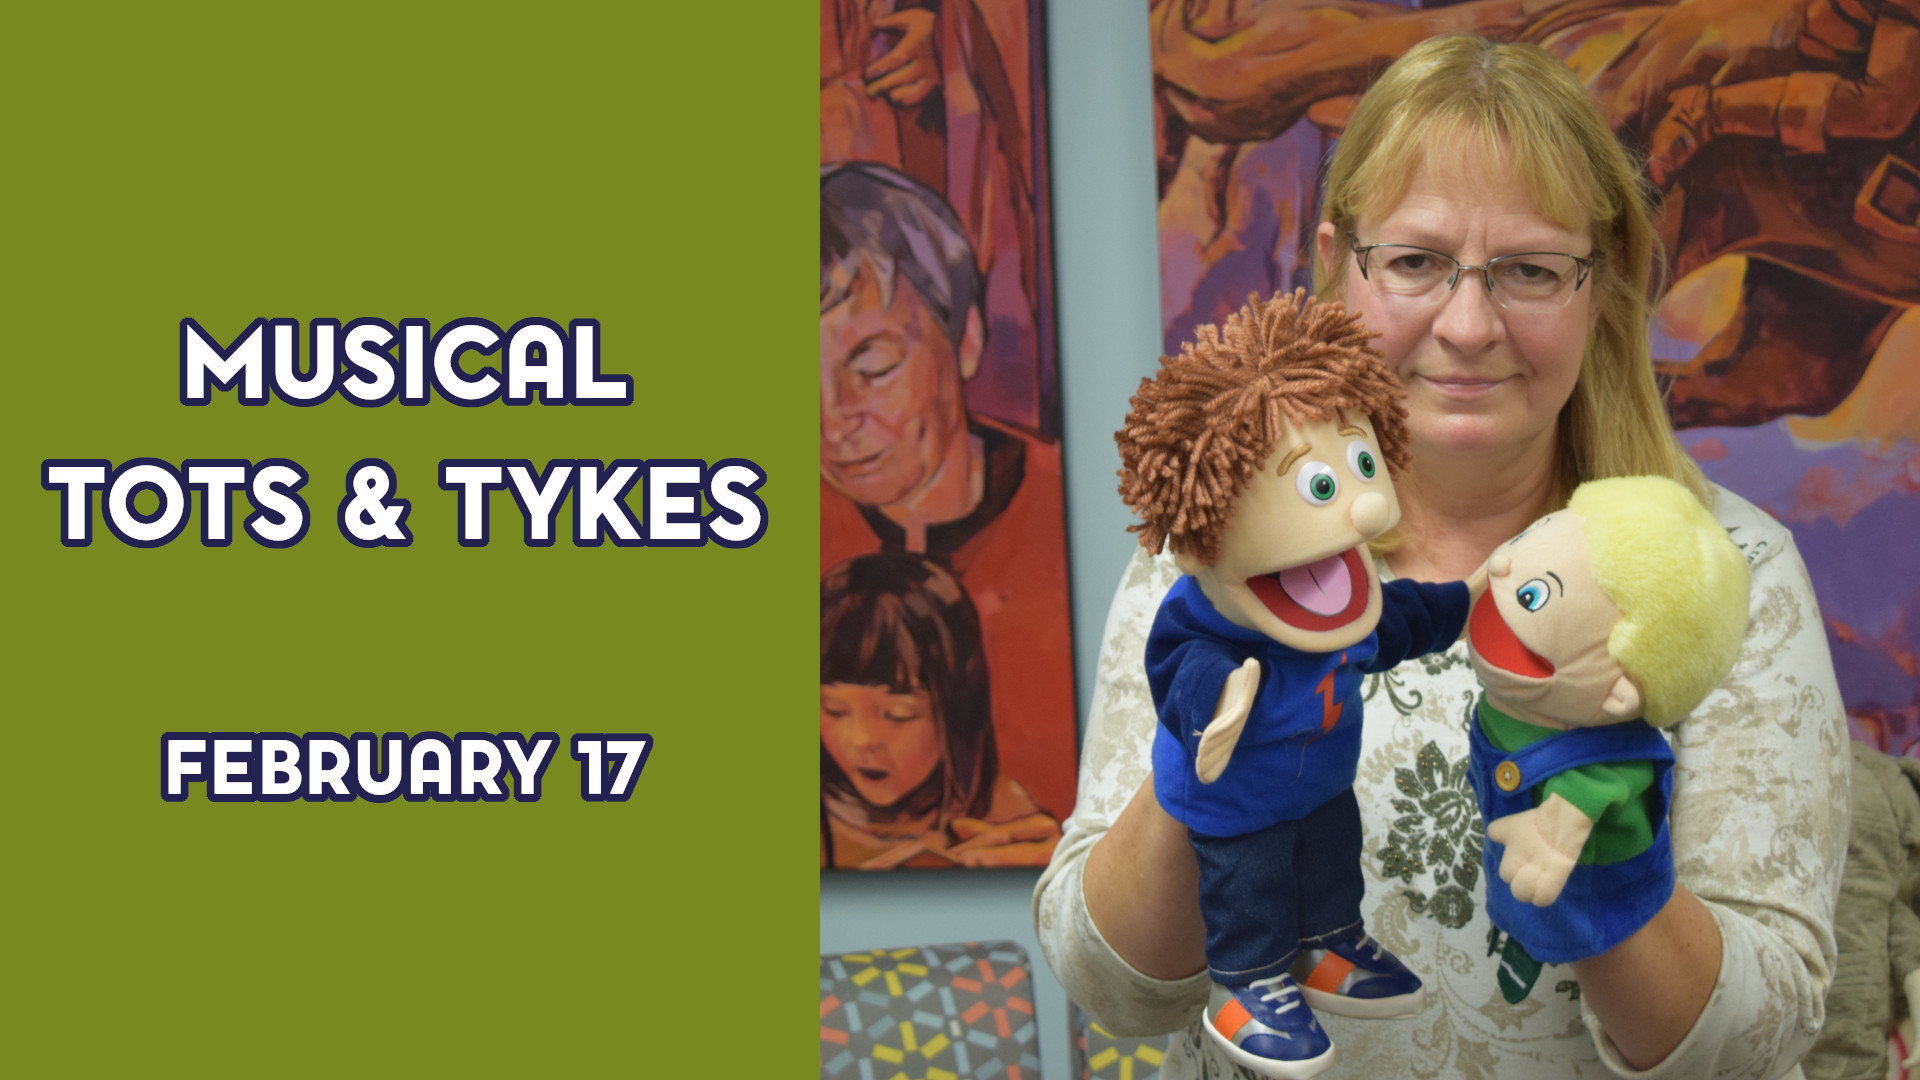 A woman holds puppets next to the text "Musical Tots & Tykes February 17"